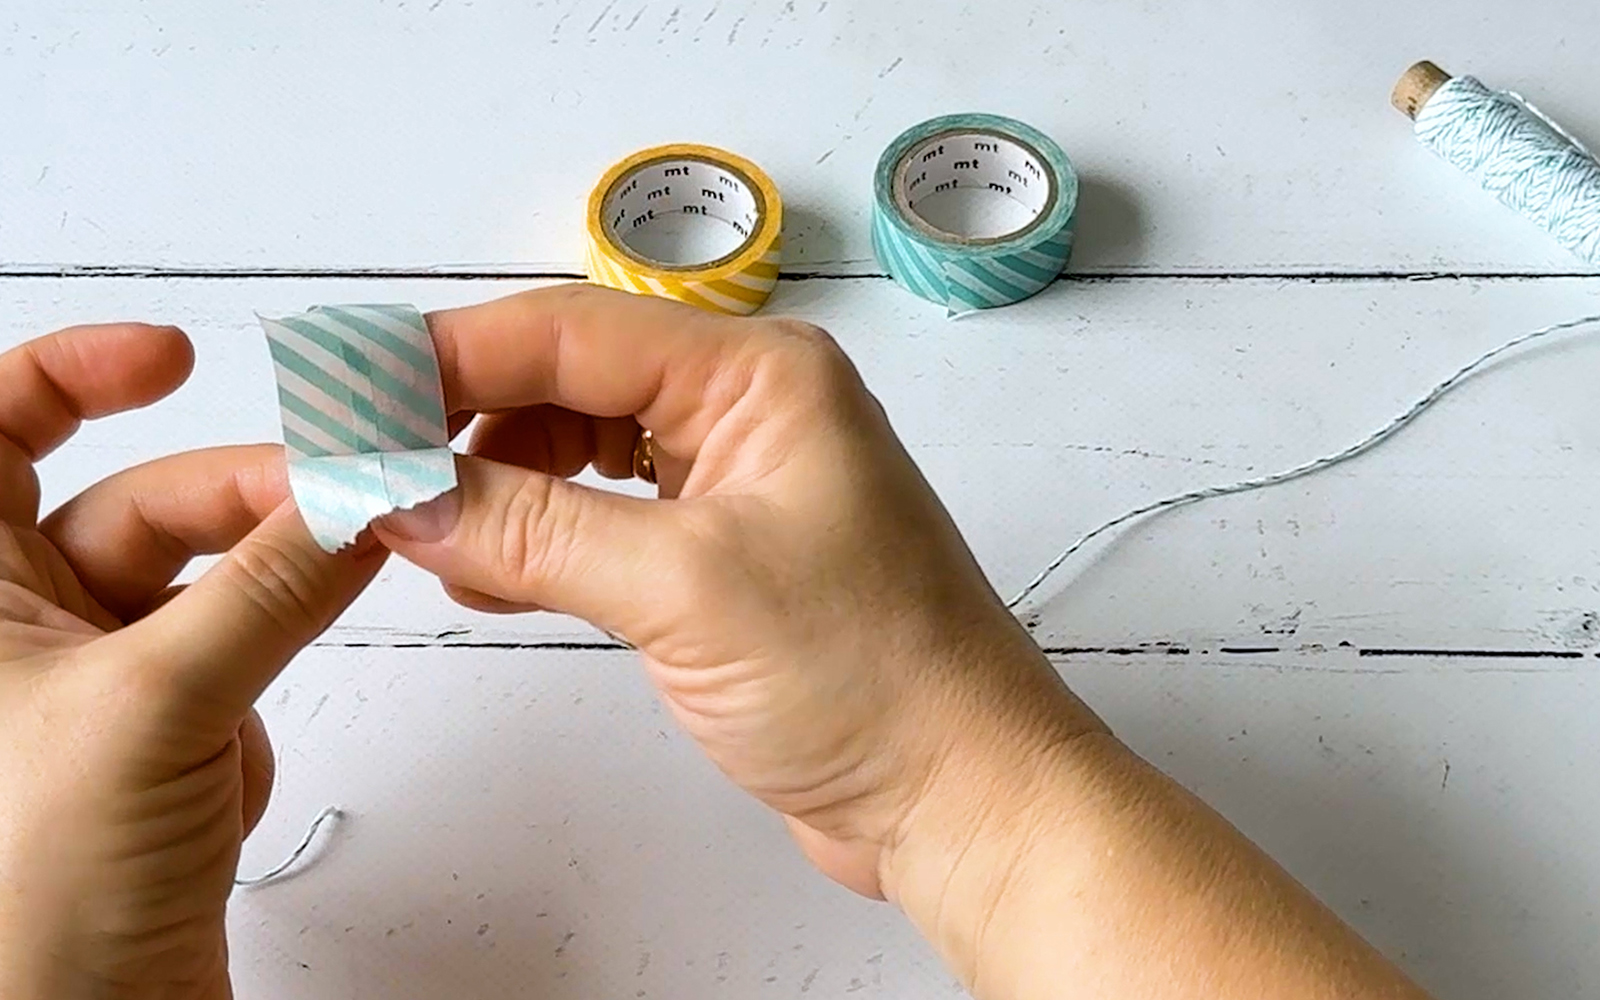 Hands sticking two pieces of tape together